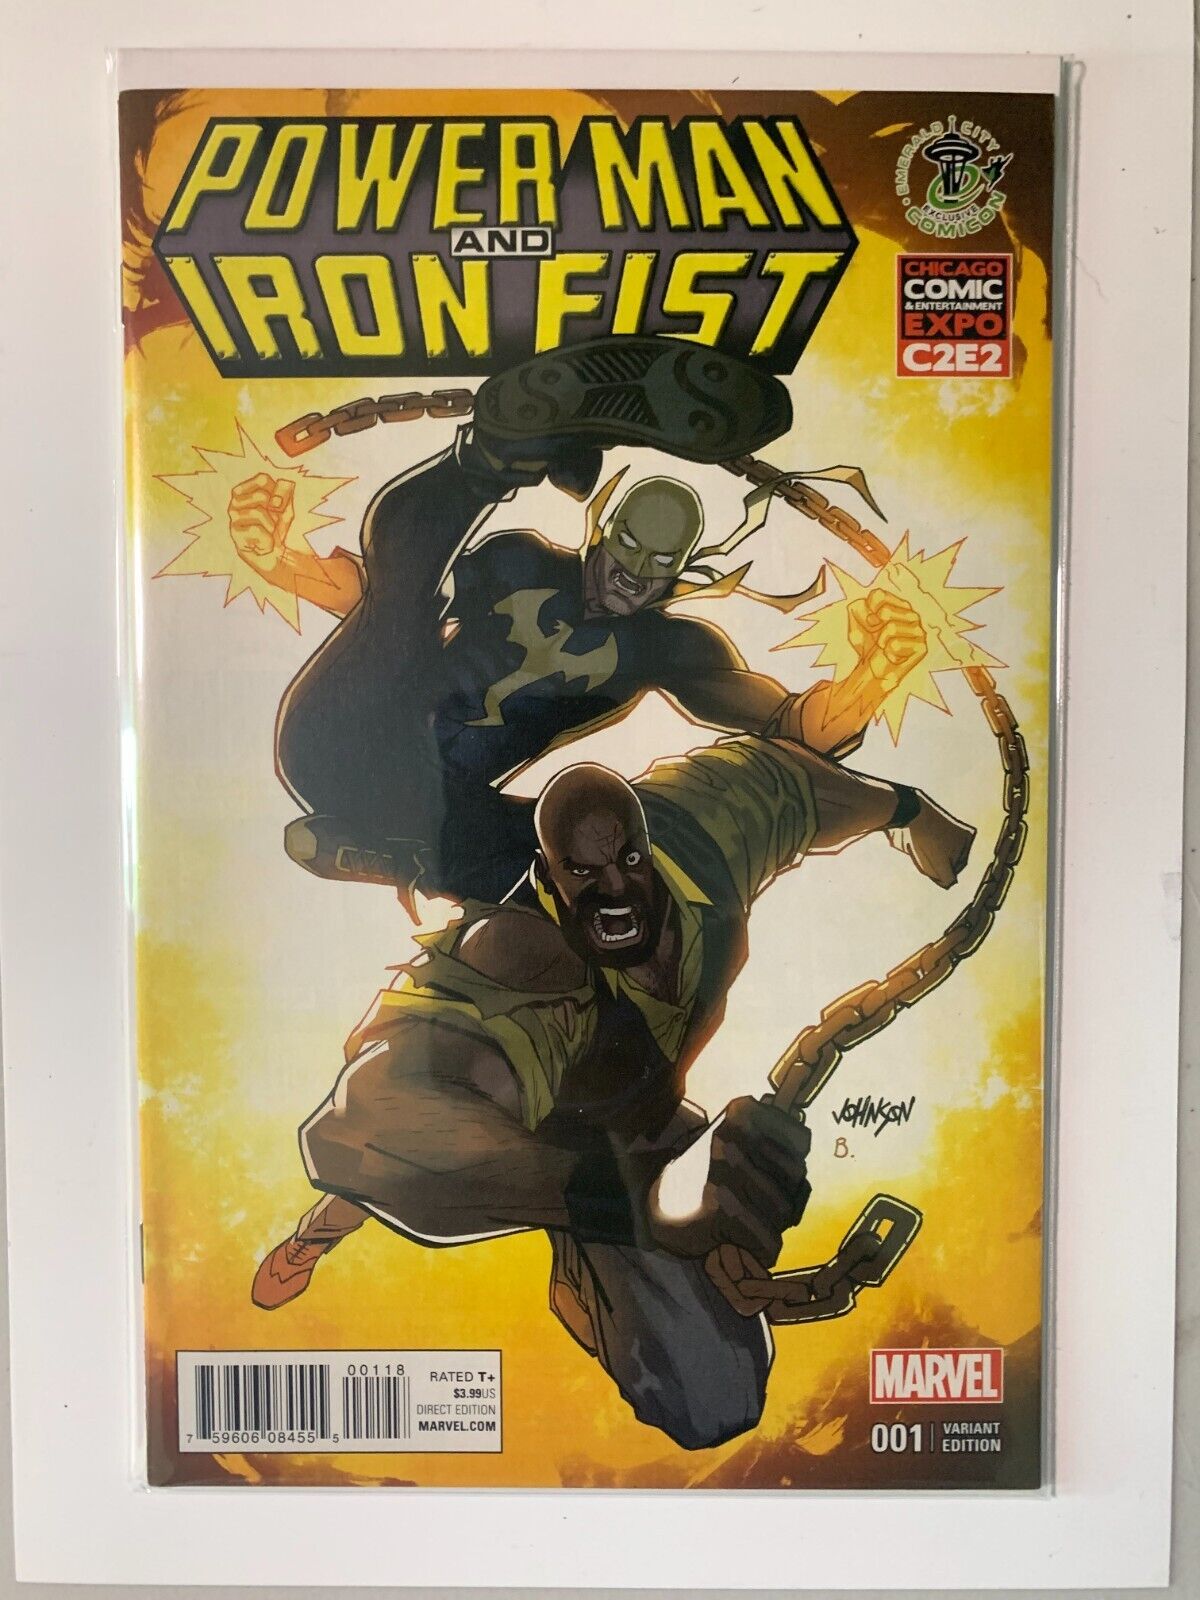 POWER MAN AND IRON FIST #1 NM C2E2 / EMERALD CITY EXCLUSIVE VARIANT